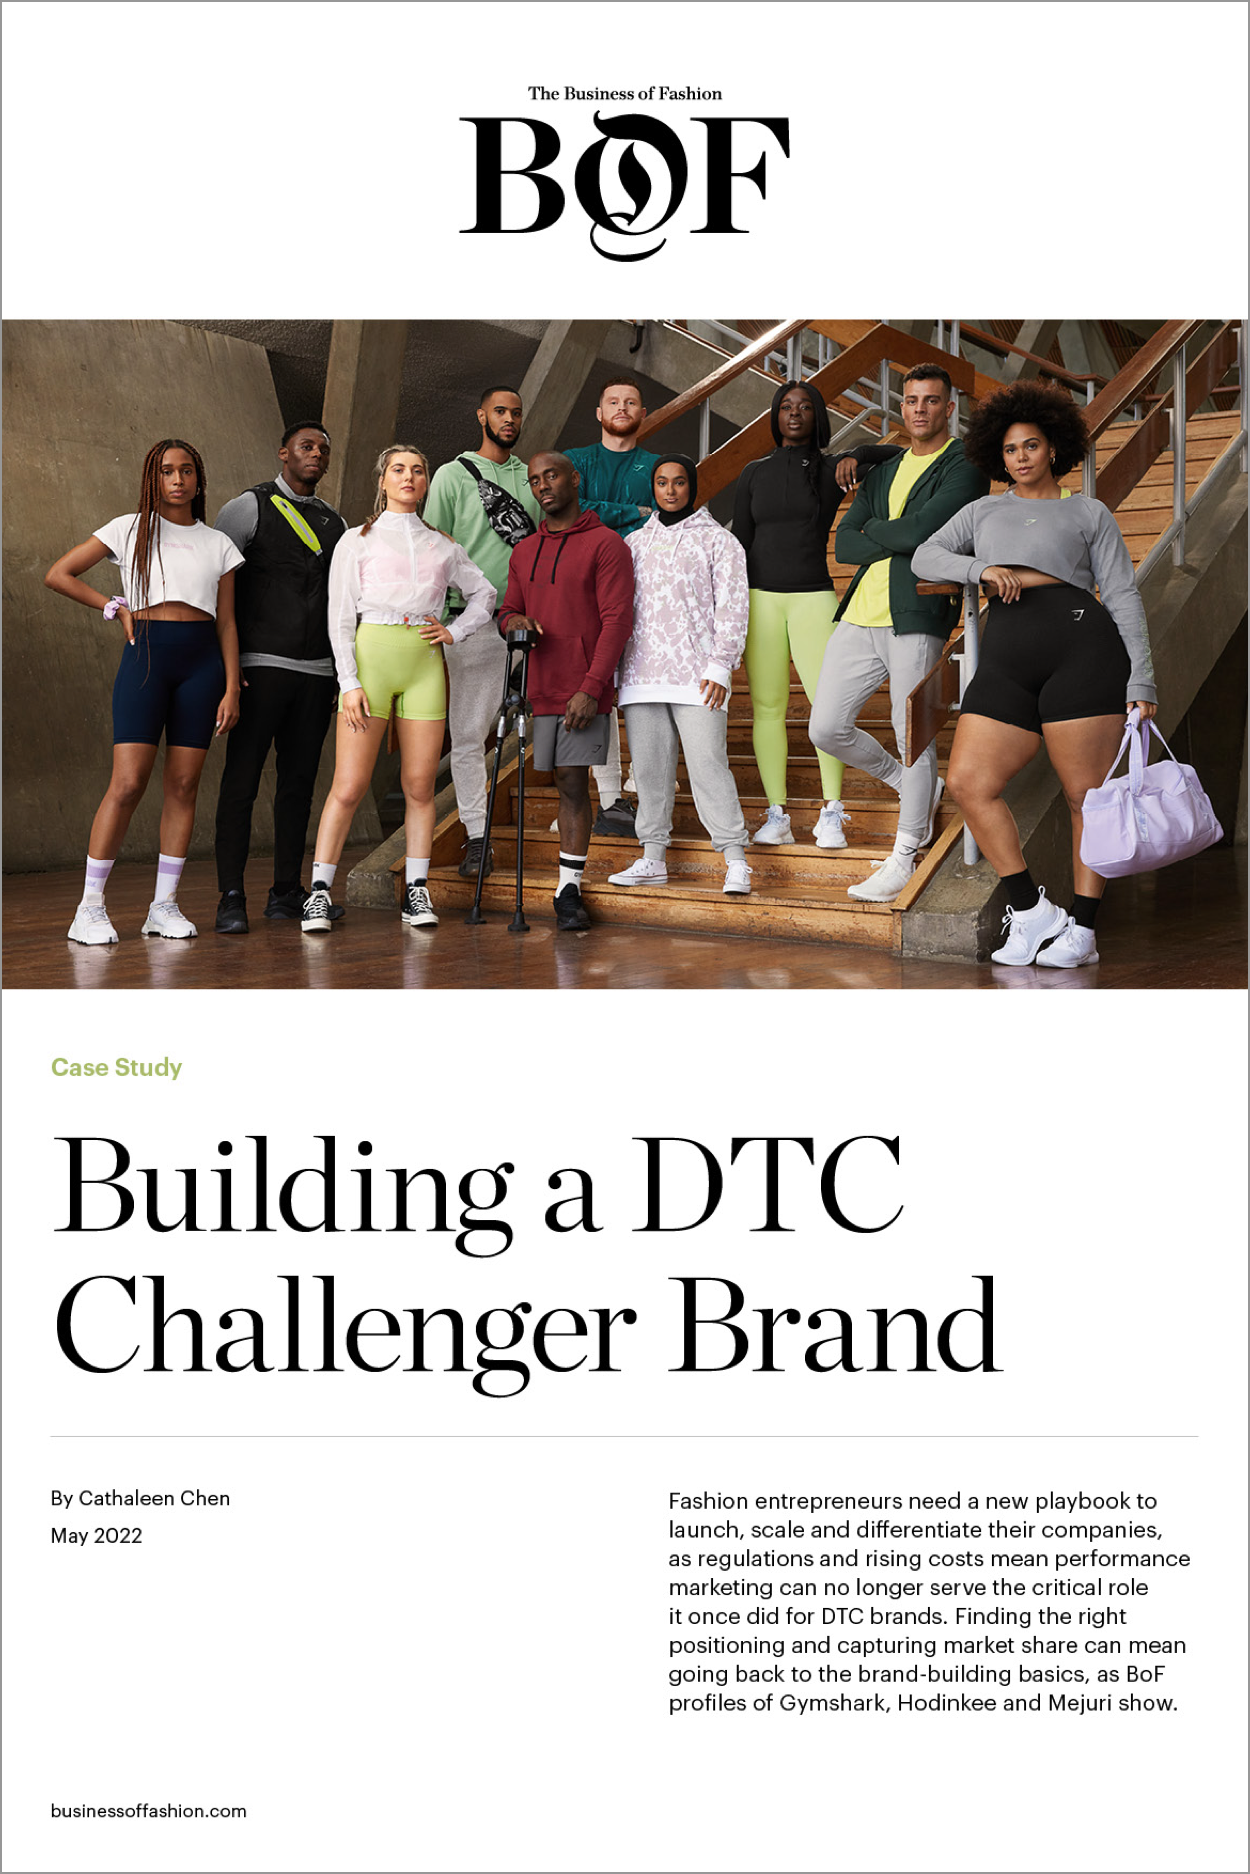 Case Study, Building a DTC Challenger Brand